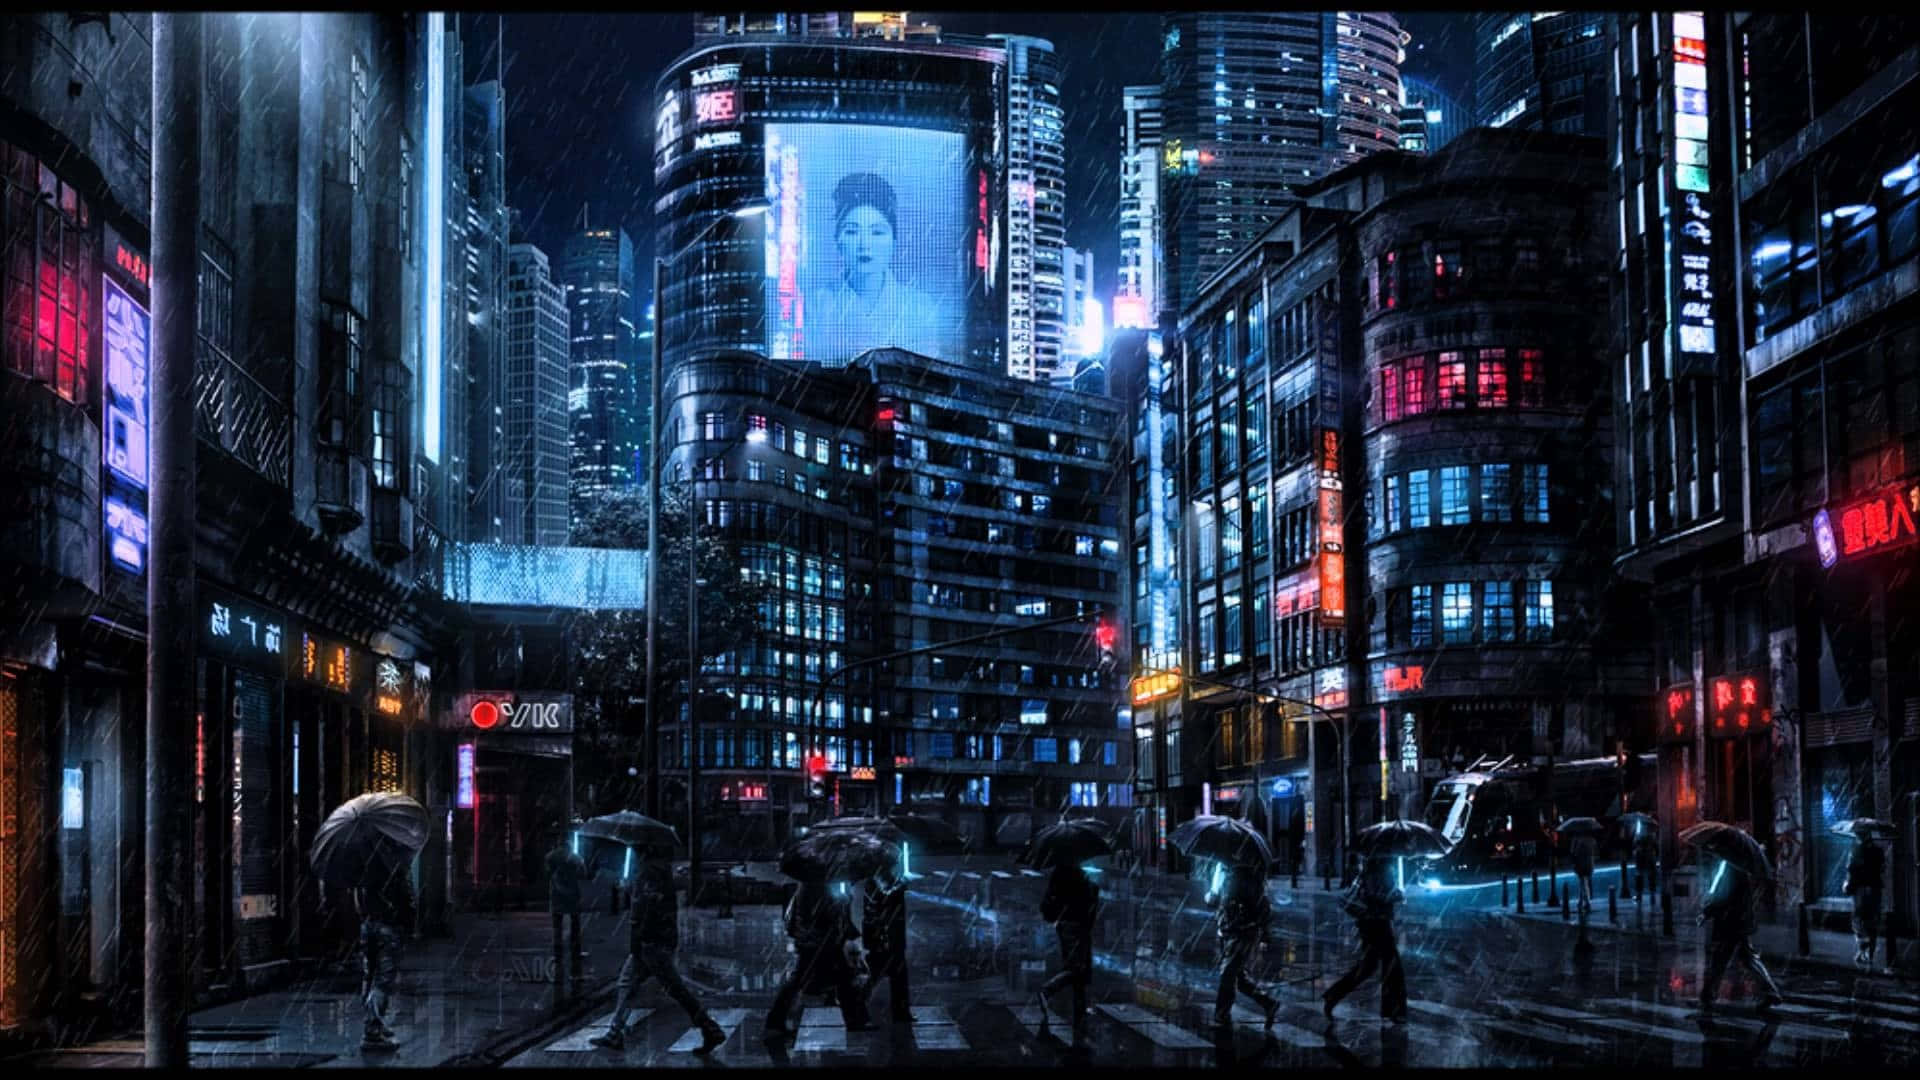 Experience the chaotic world of Dark City